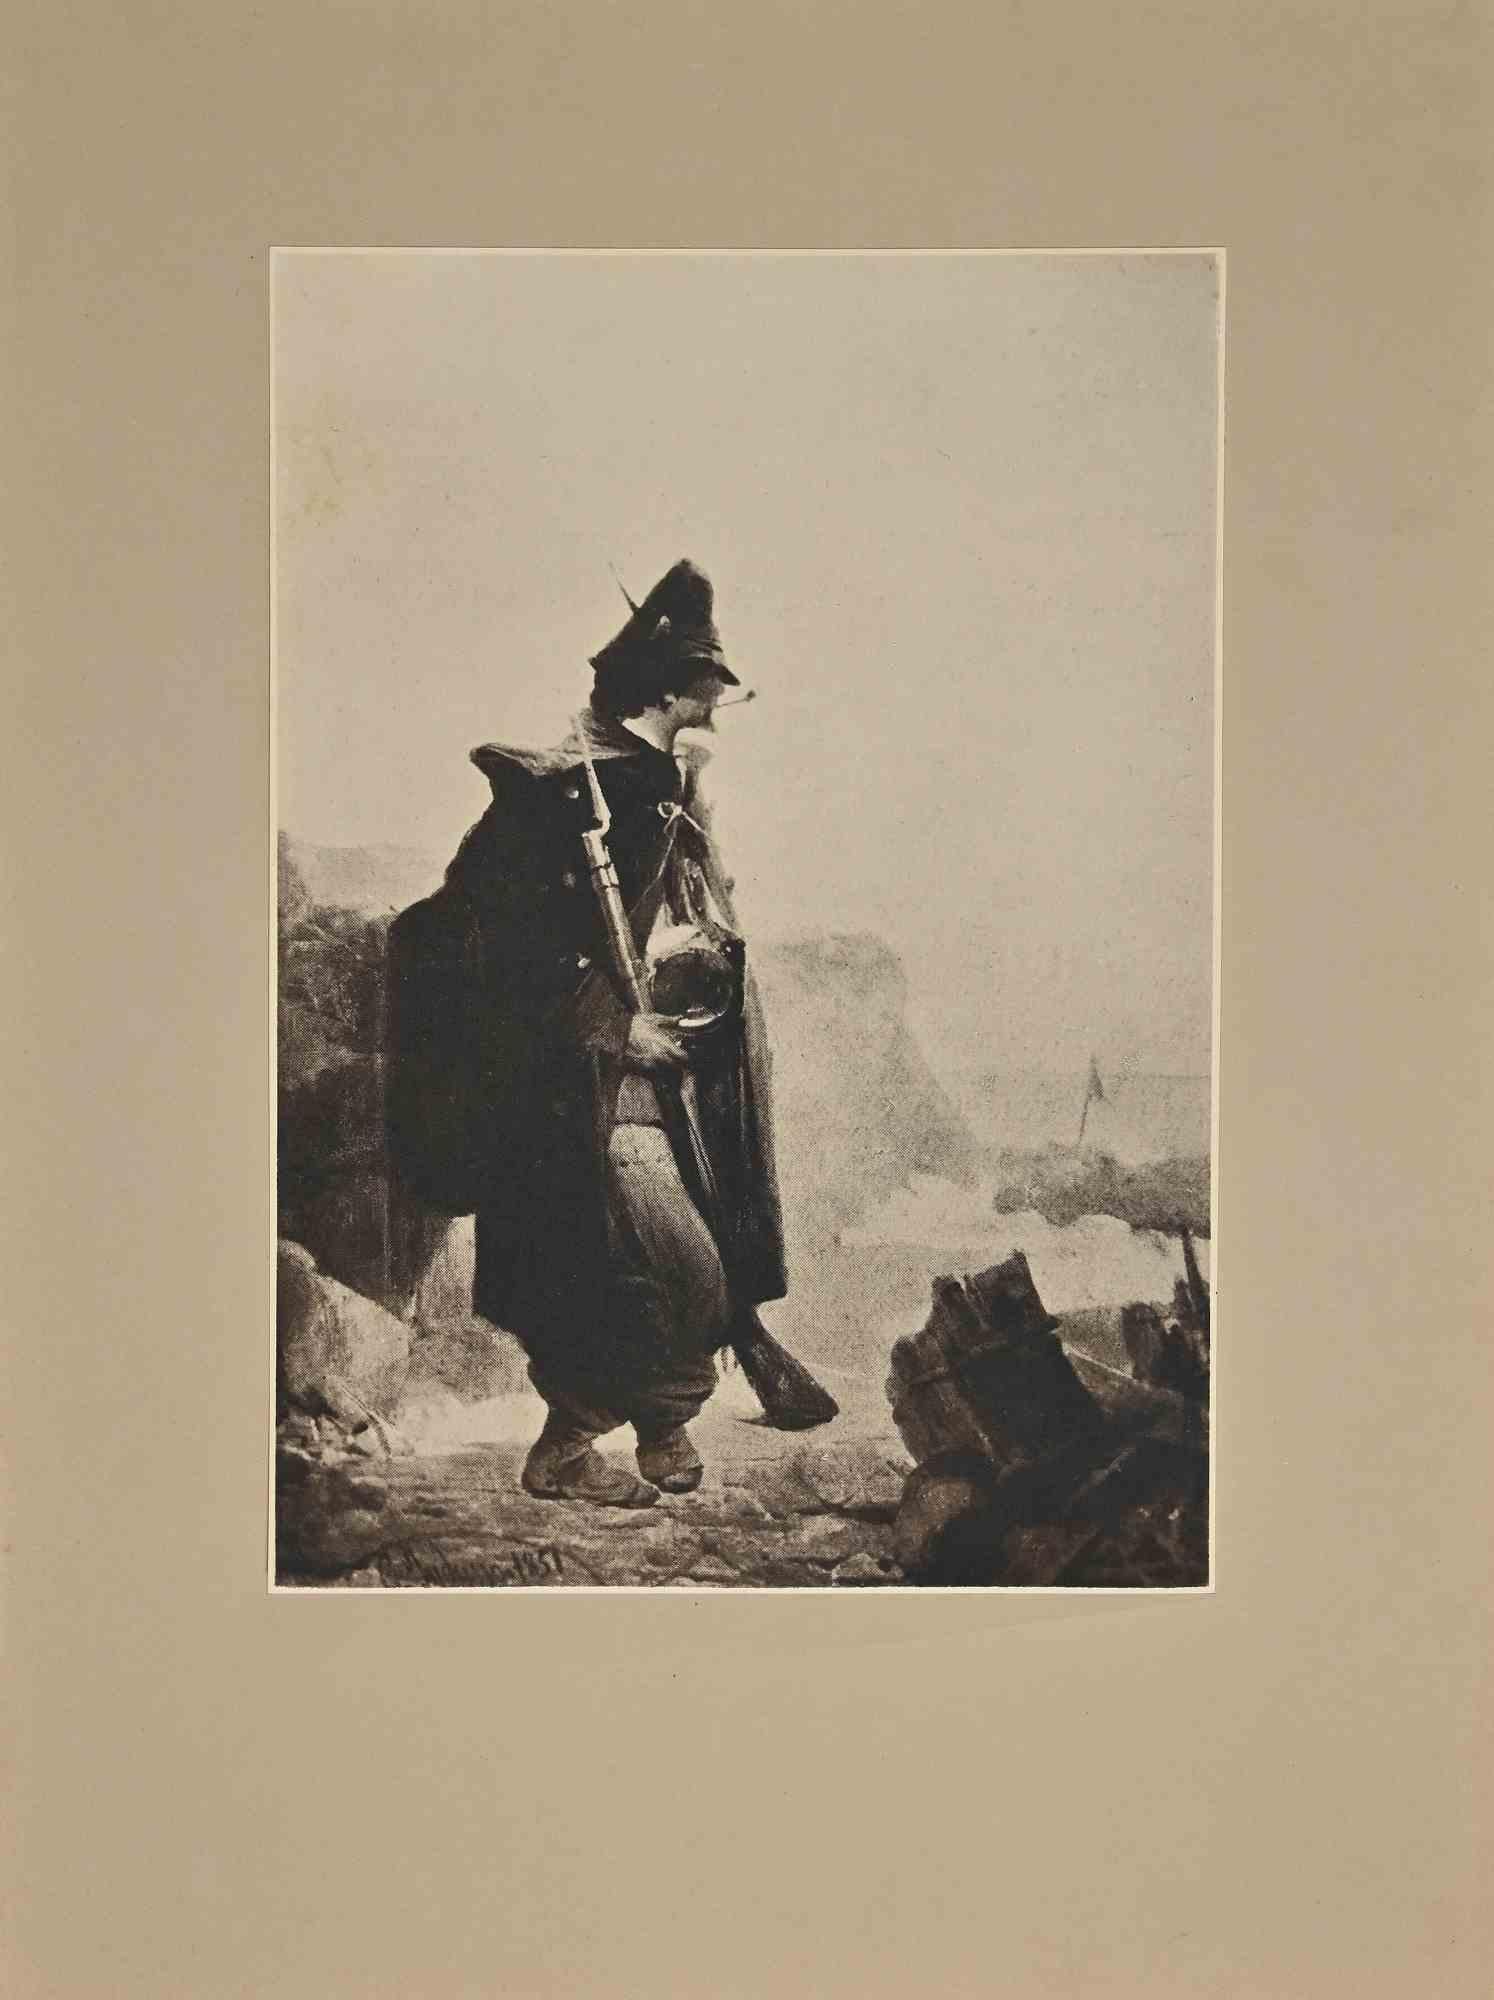 Unknown Figurative Photograph - Soldier - Vintage photograph - Early 20th Century